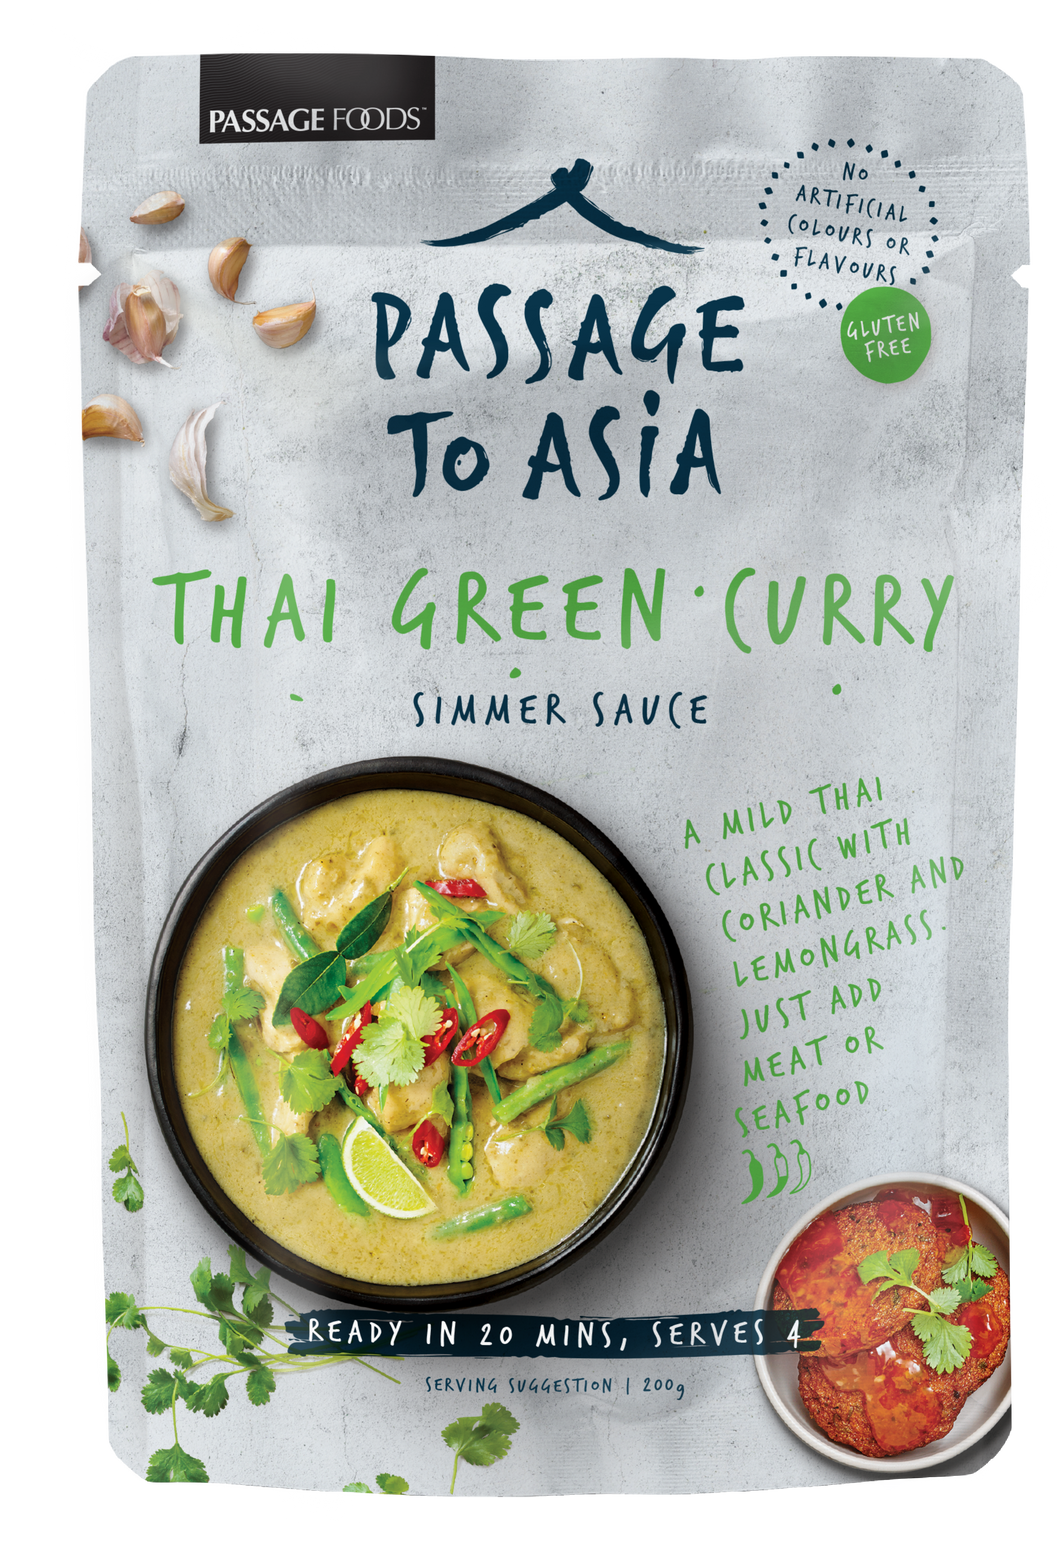 Passage to Asia - Thai Green Curry Simmer Sauce